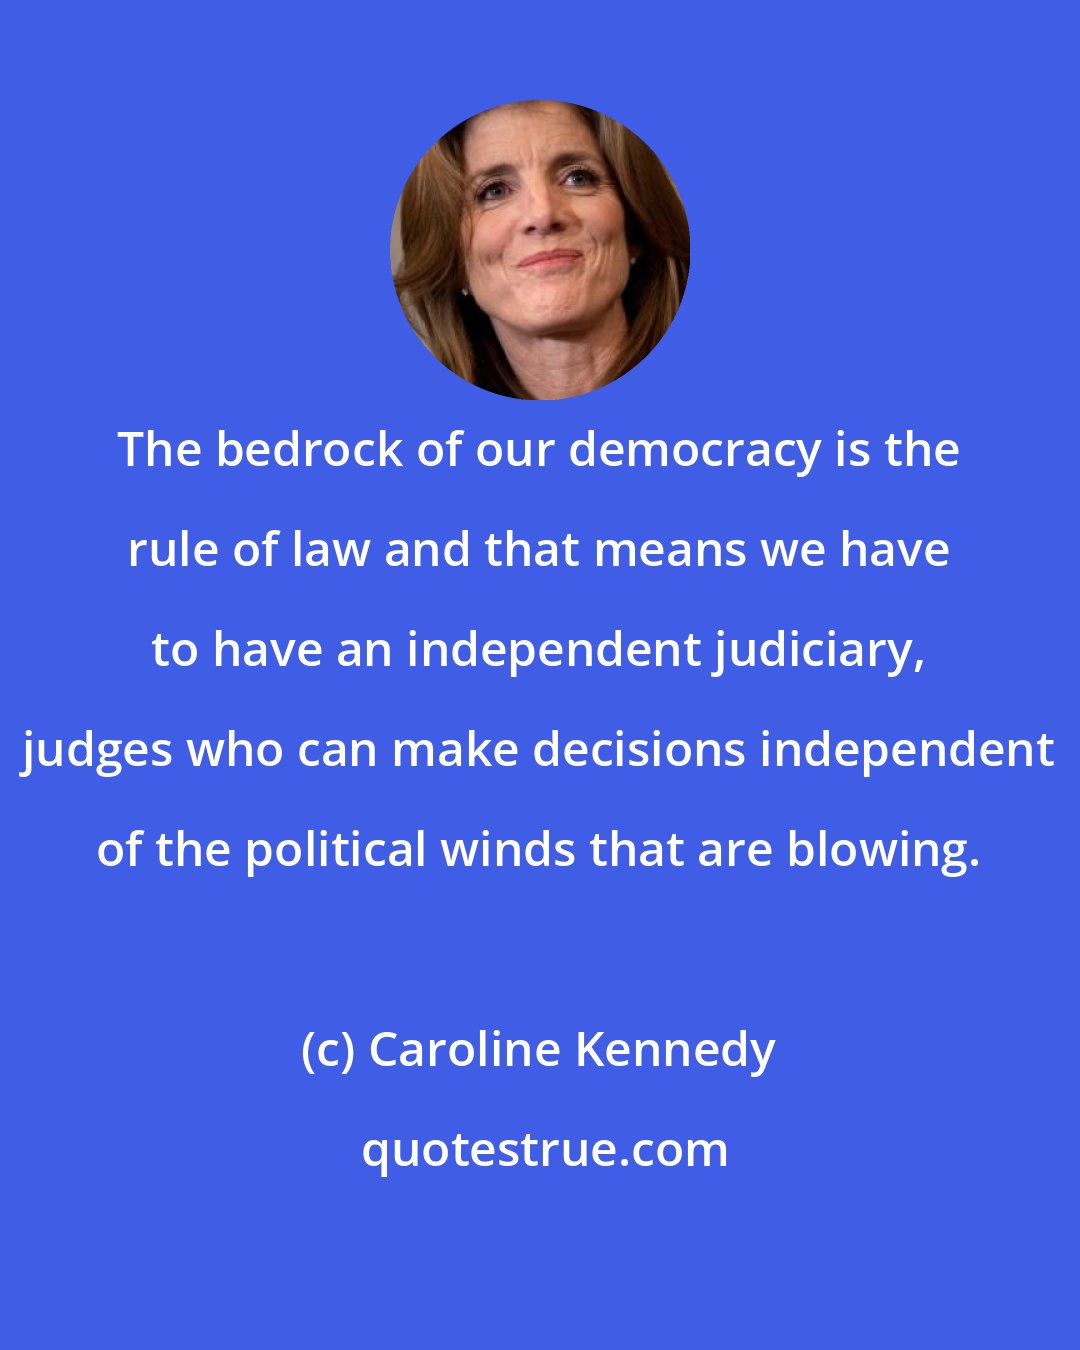 Caroline Kennedy: The bedrock of our democracy is the rule of law and that means we have to have an independent judiciary, judges who can make decisions independent of the political winds that are blowing.